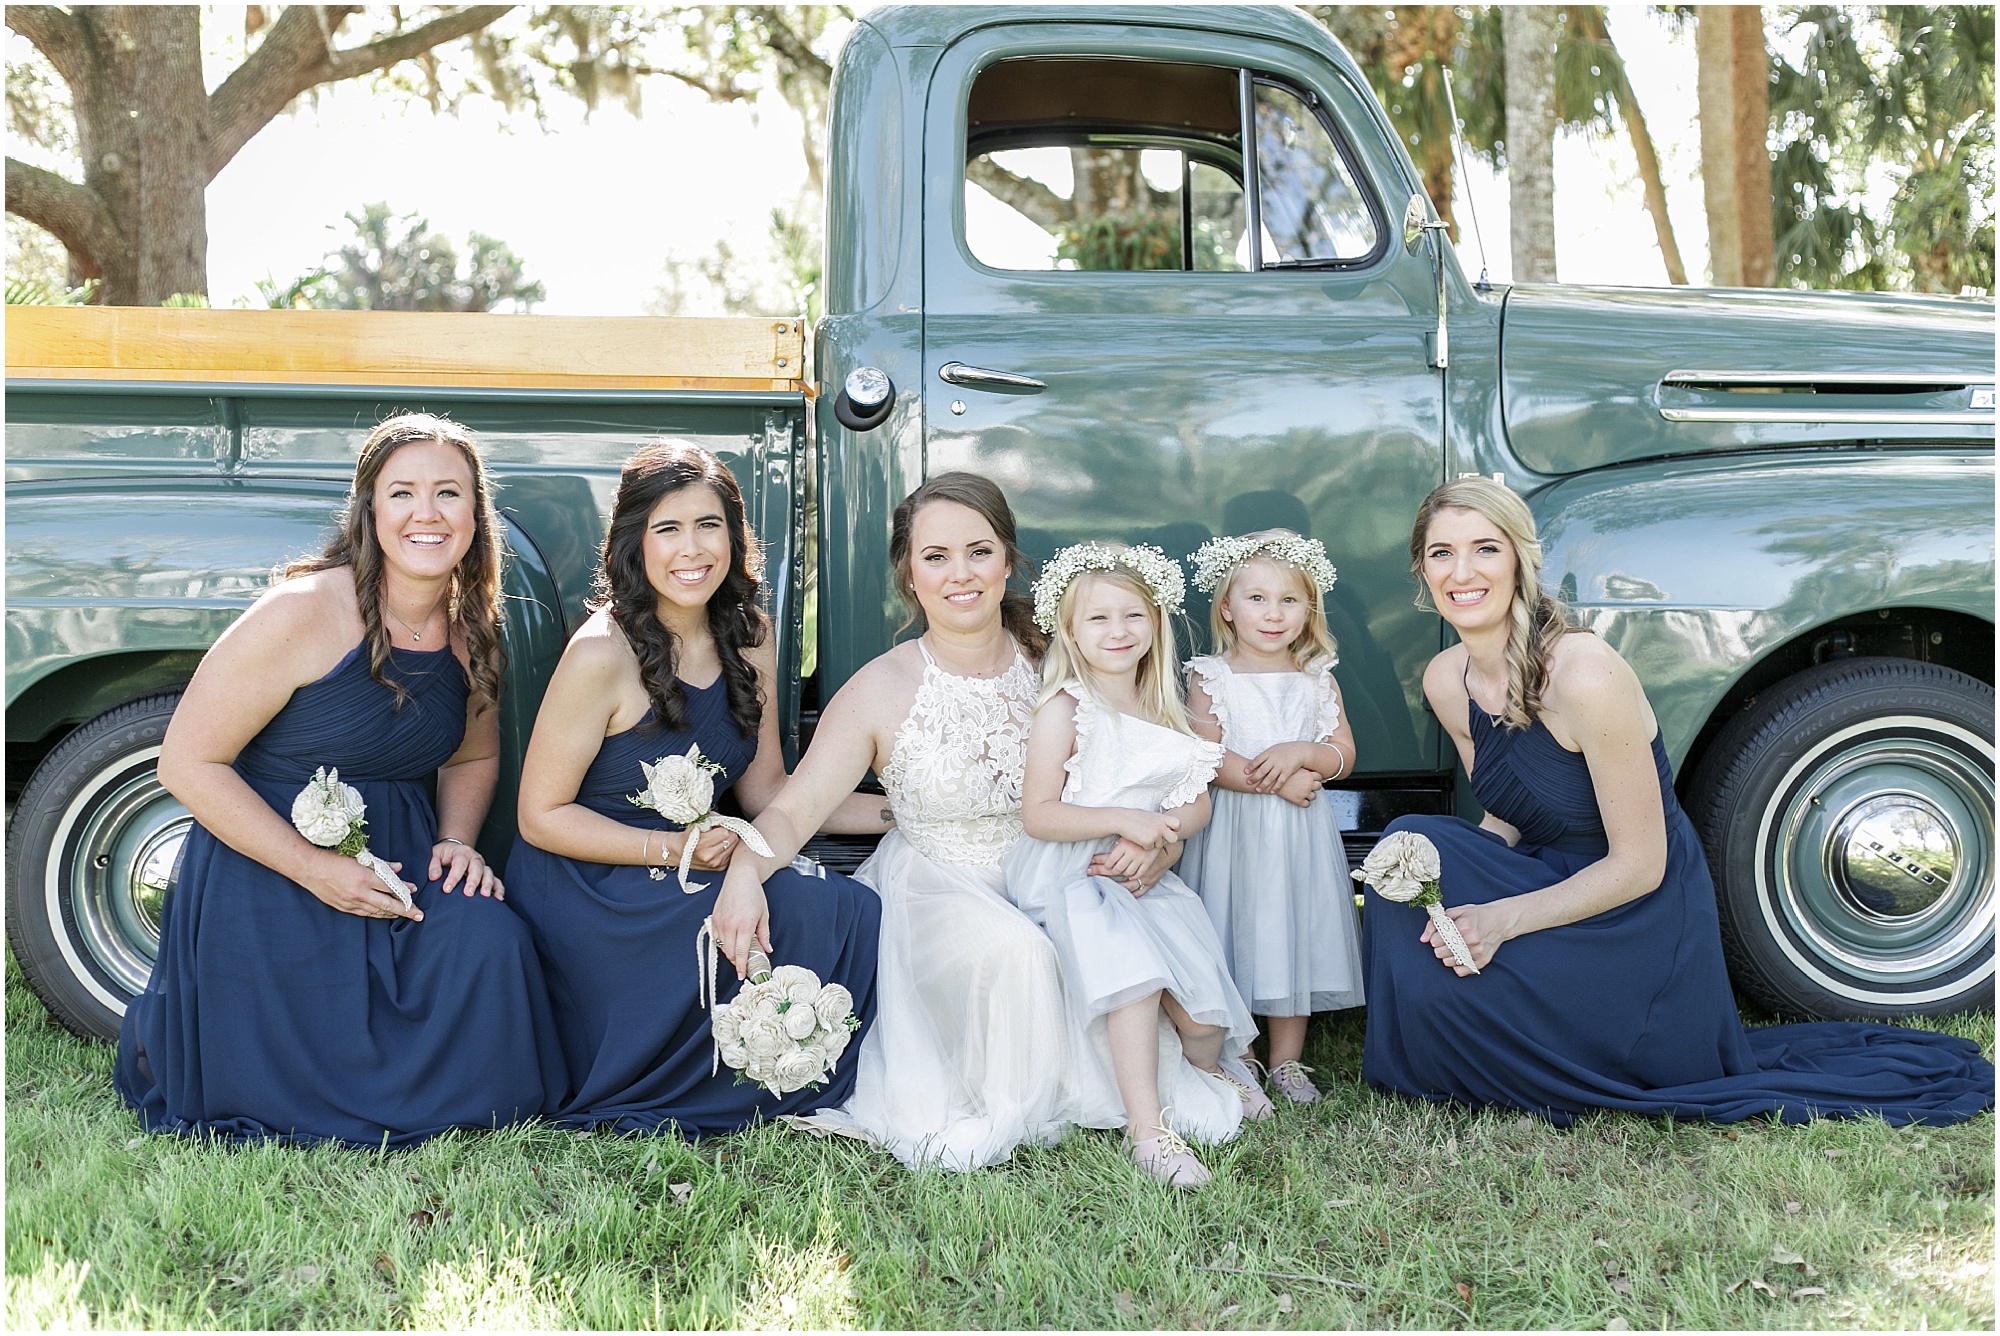 Bride with her bridesmaids and flower girls in front of a green vintage truck